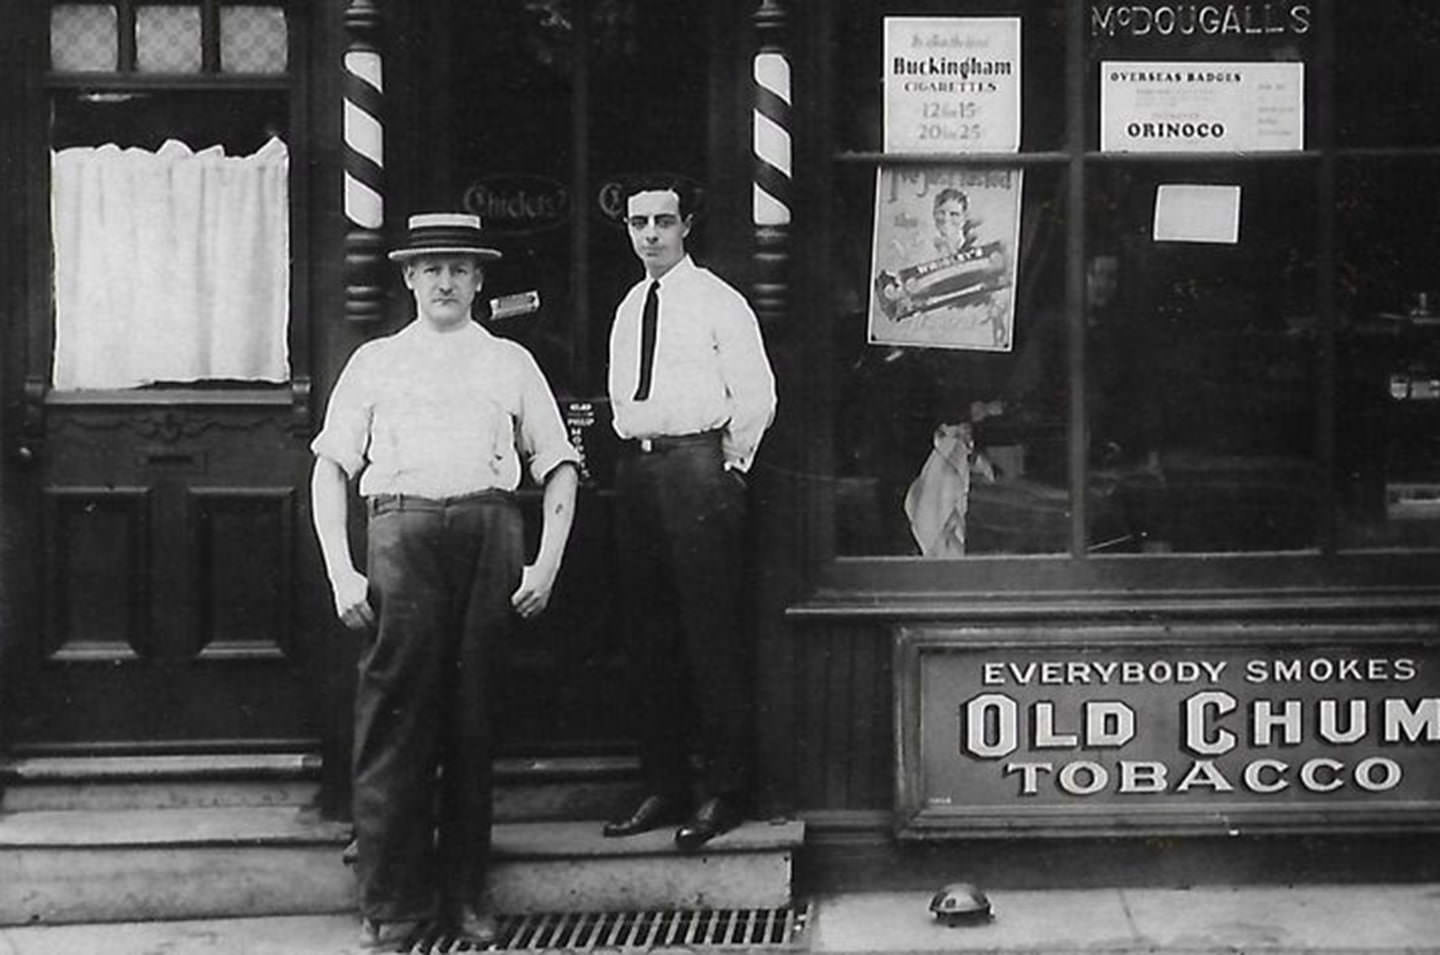 Daniel McDougall and Bobby Mitchell outside barber shop at 625 Gerrard Street East, sometime just after 1912.